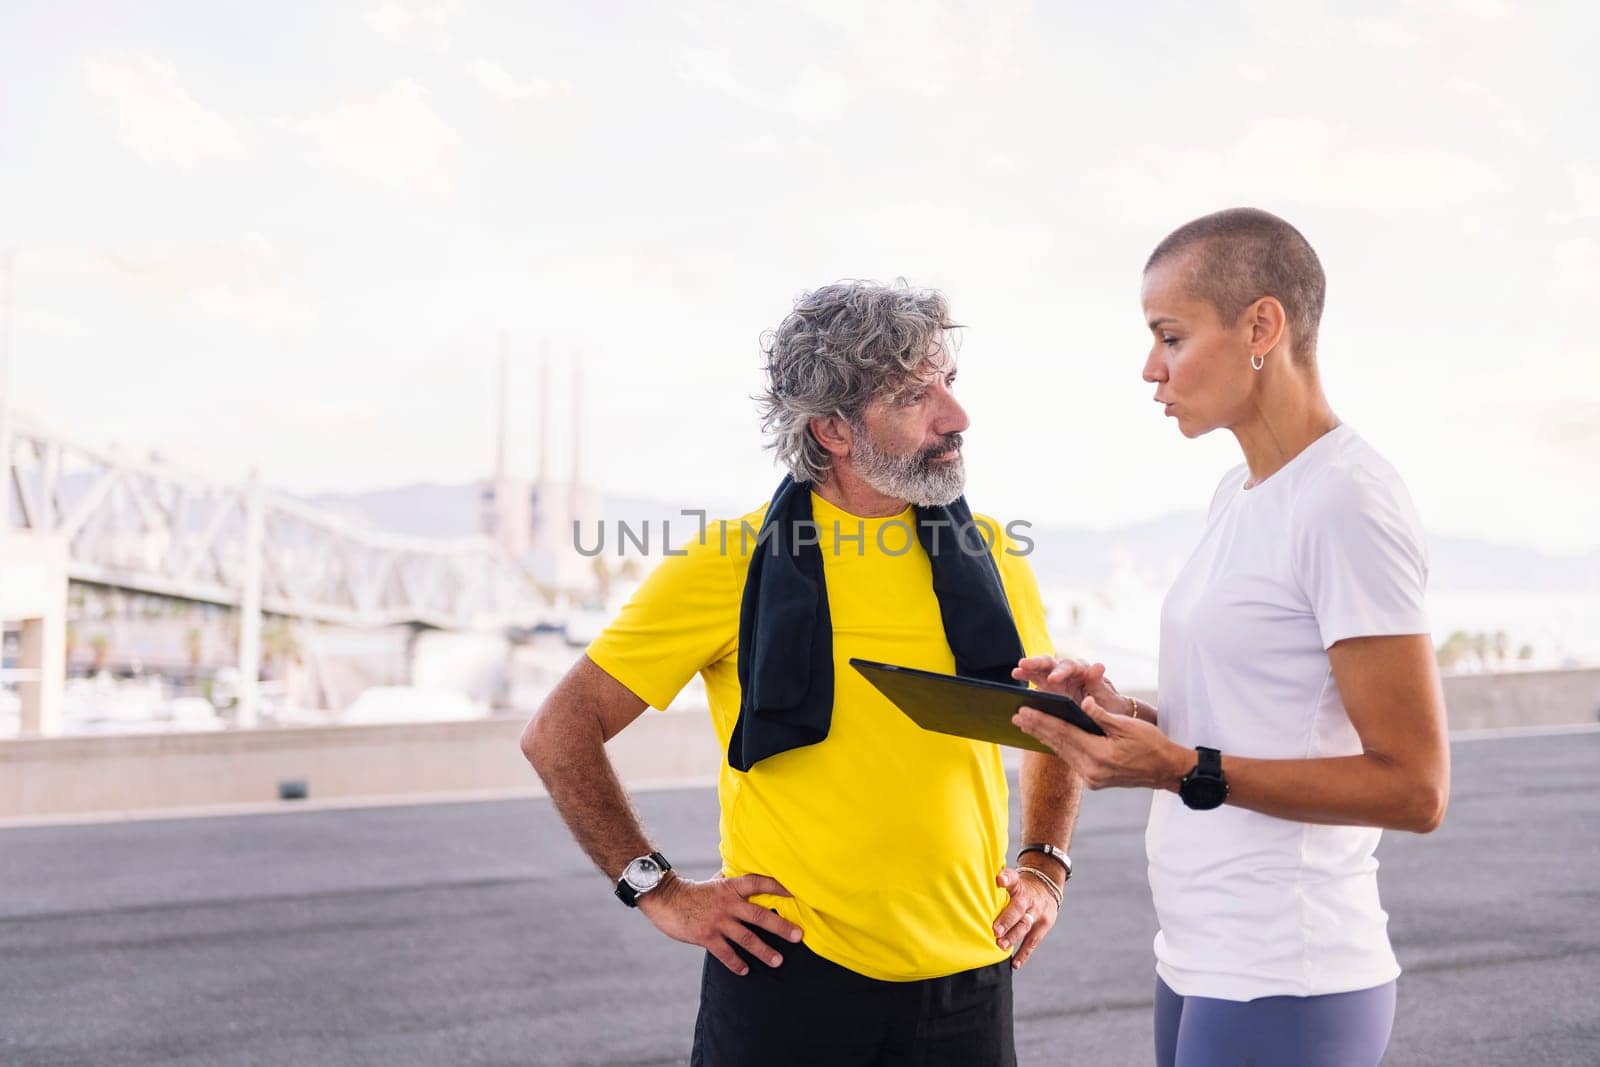 female personal trainer explaining workout with tablet to an elderly sports man, concept of active and healthy lifestyle in middle age, copy space for text